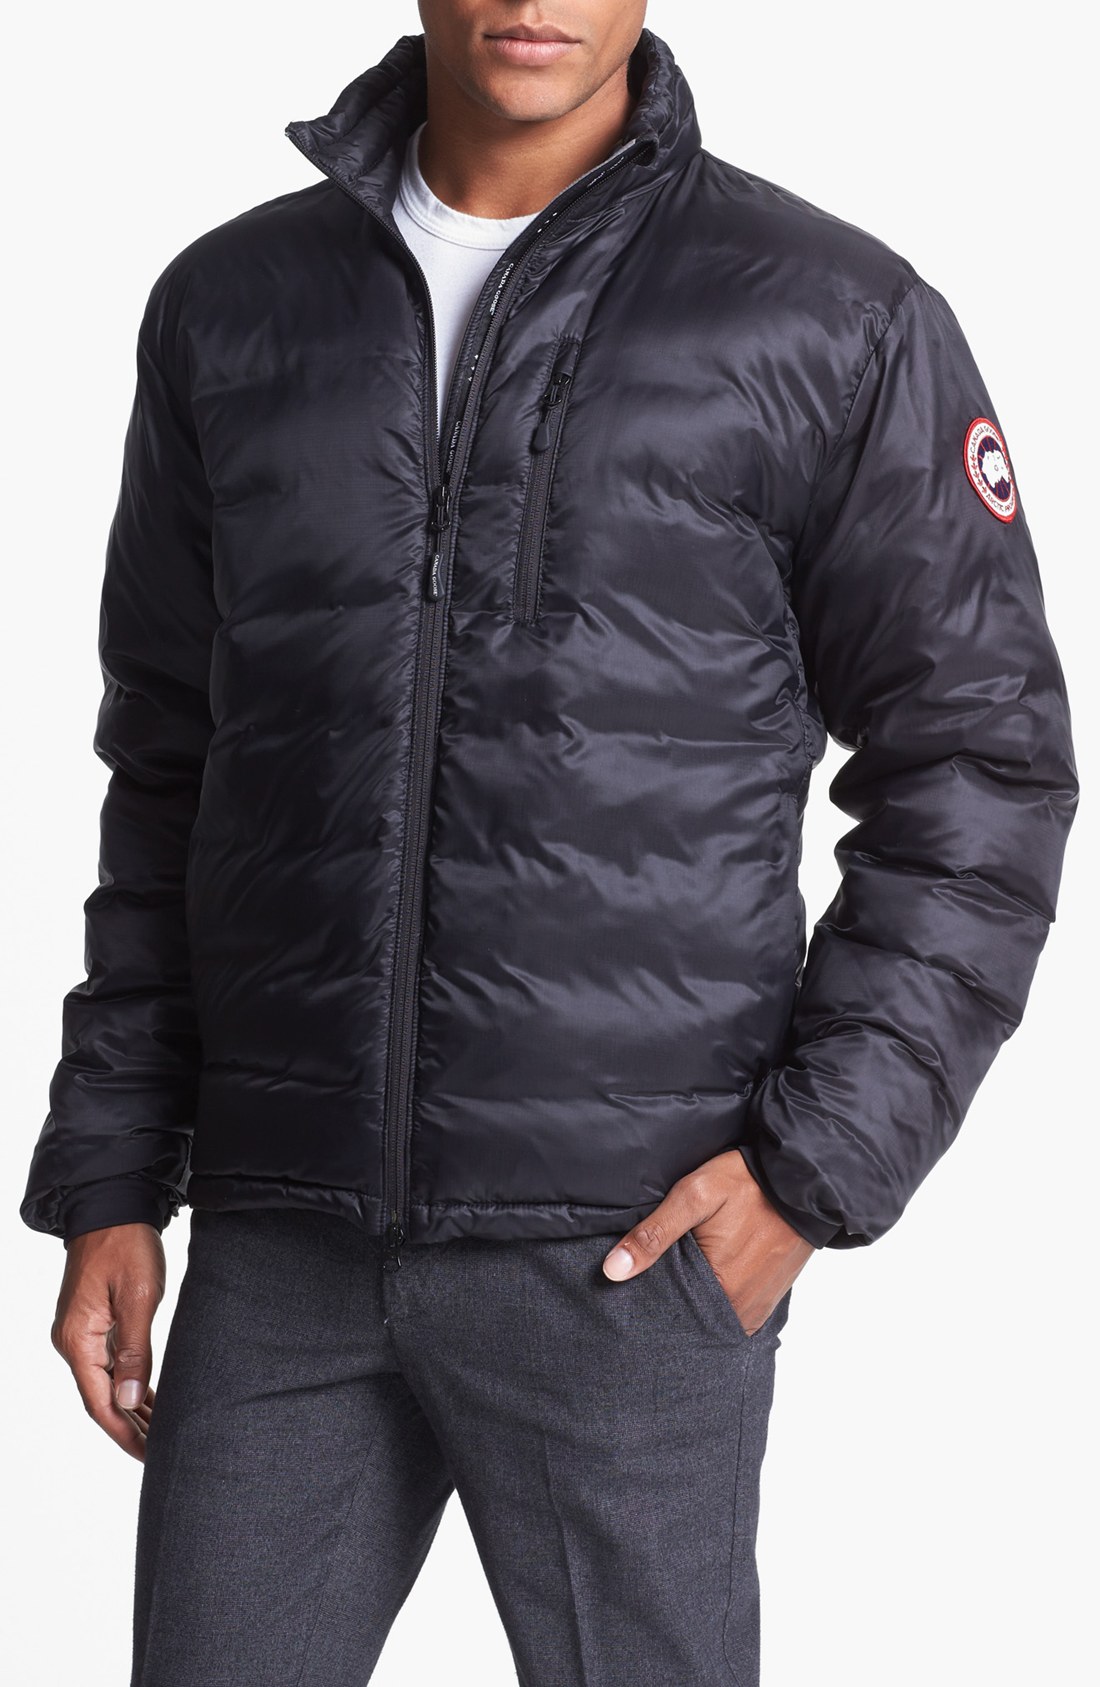 Canada Goose langford parka outlet authentic - Perfect Online Shop To Buy Canada Goose Women Camp Coat High ...